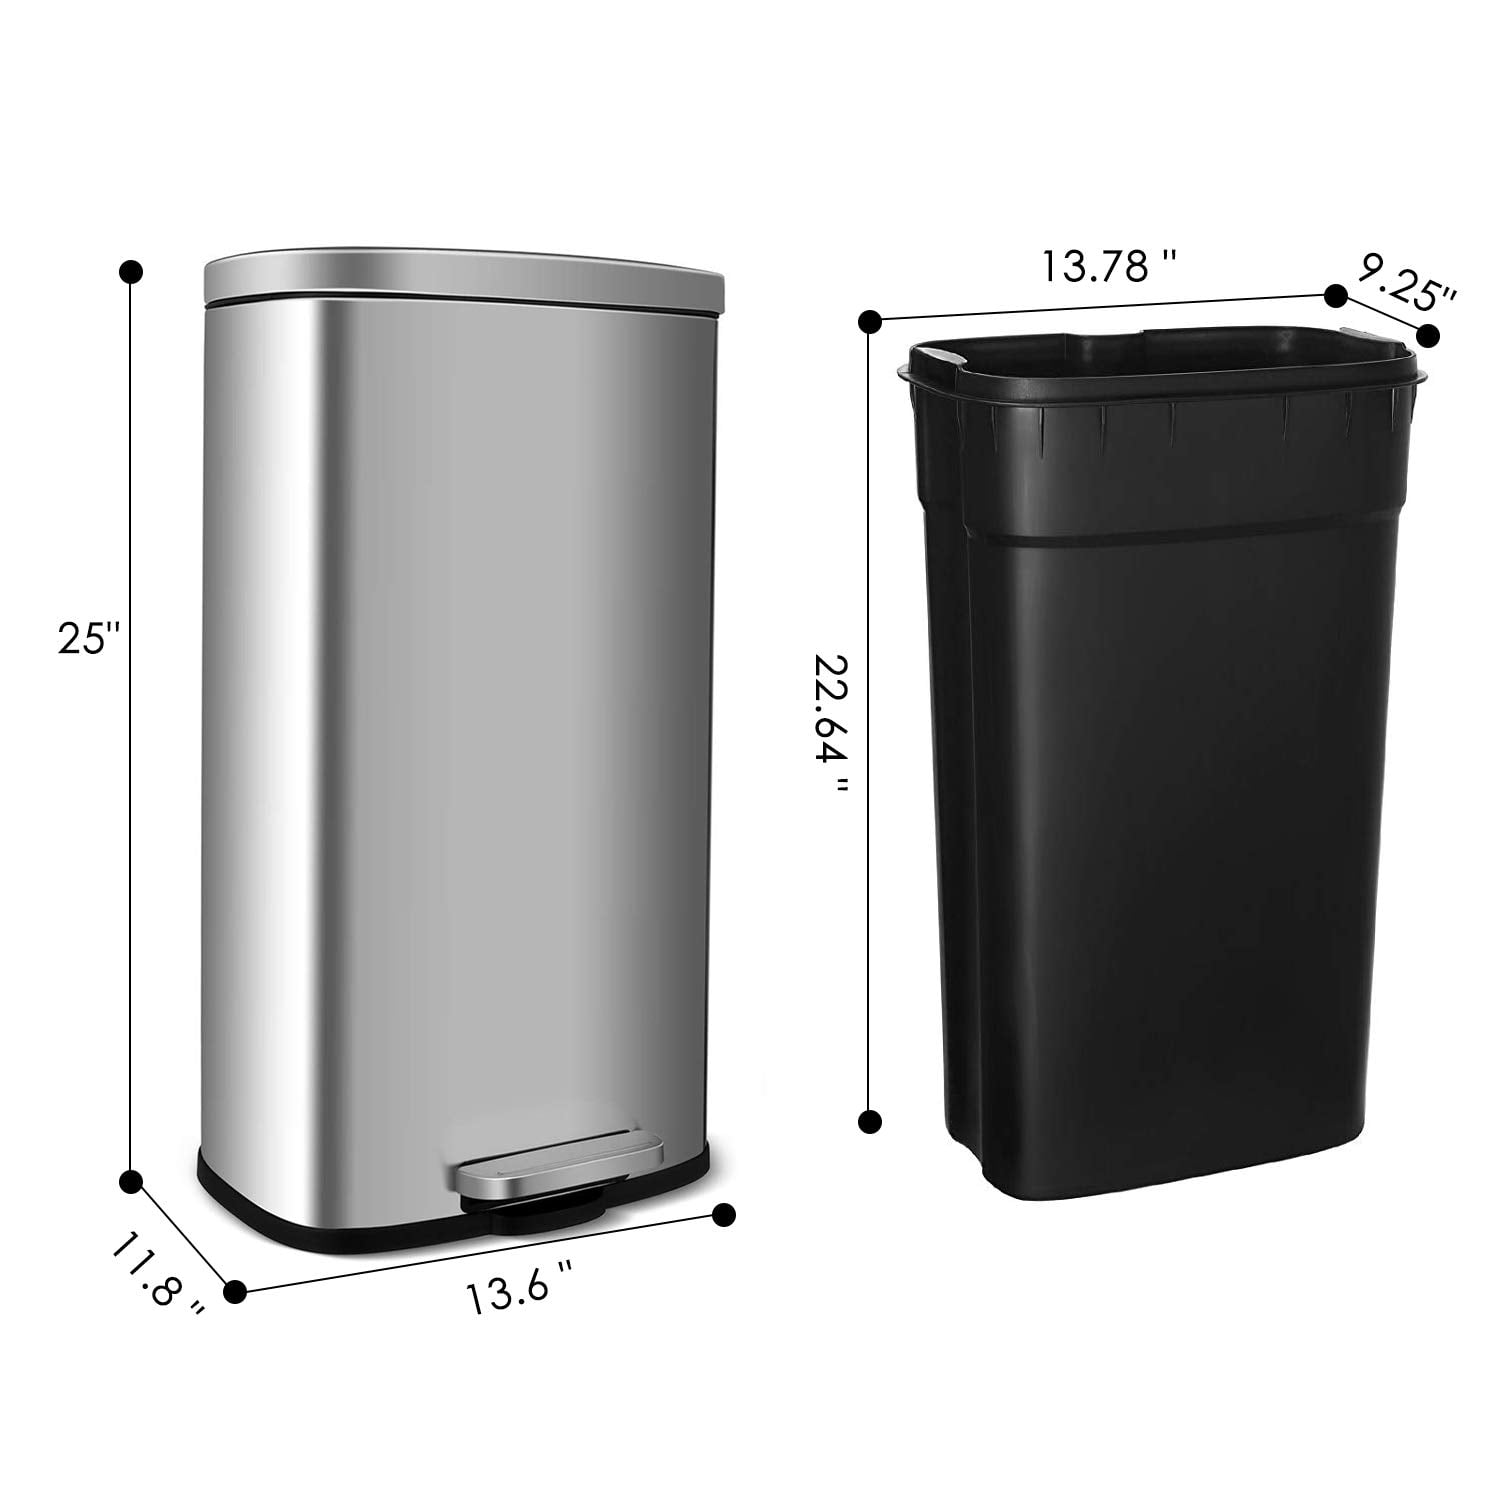 Pirecart 13.2 Gallon Step Trash Can Kitchen Garbage Can Stainless Steel, White